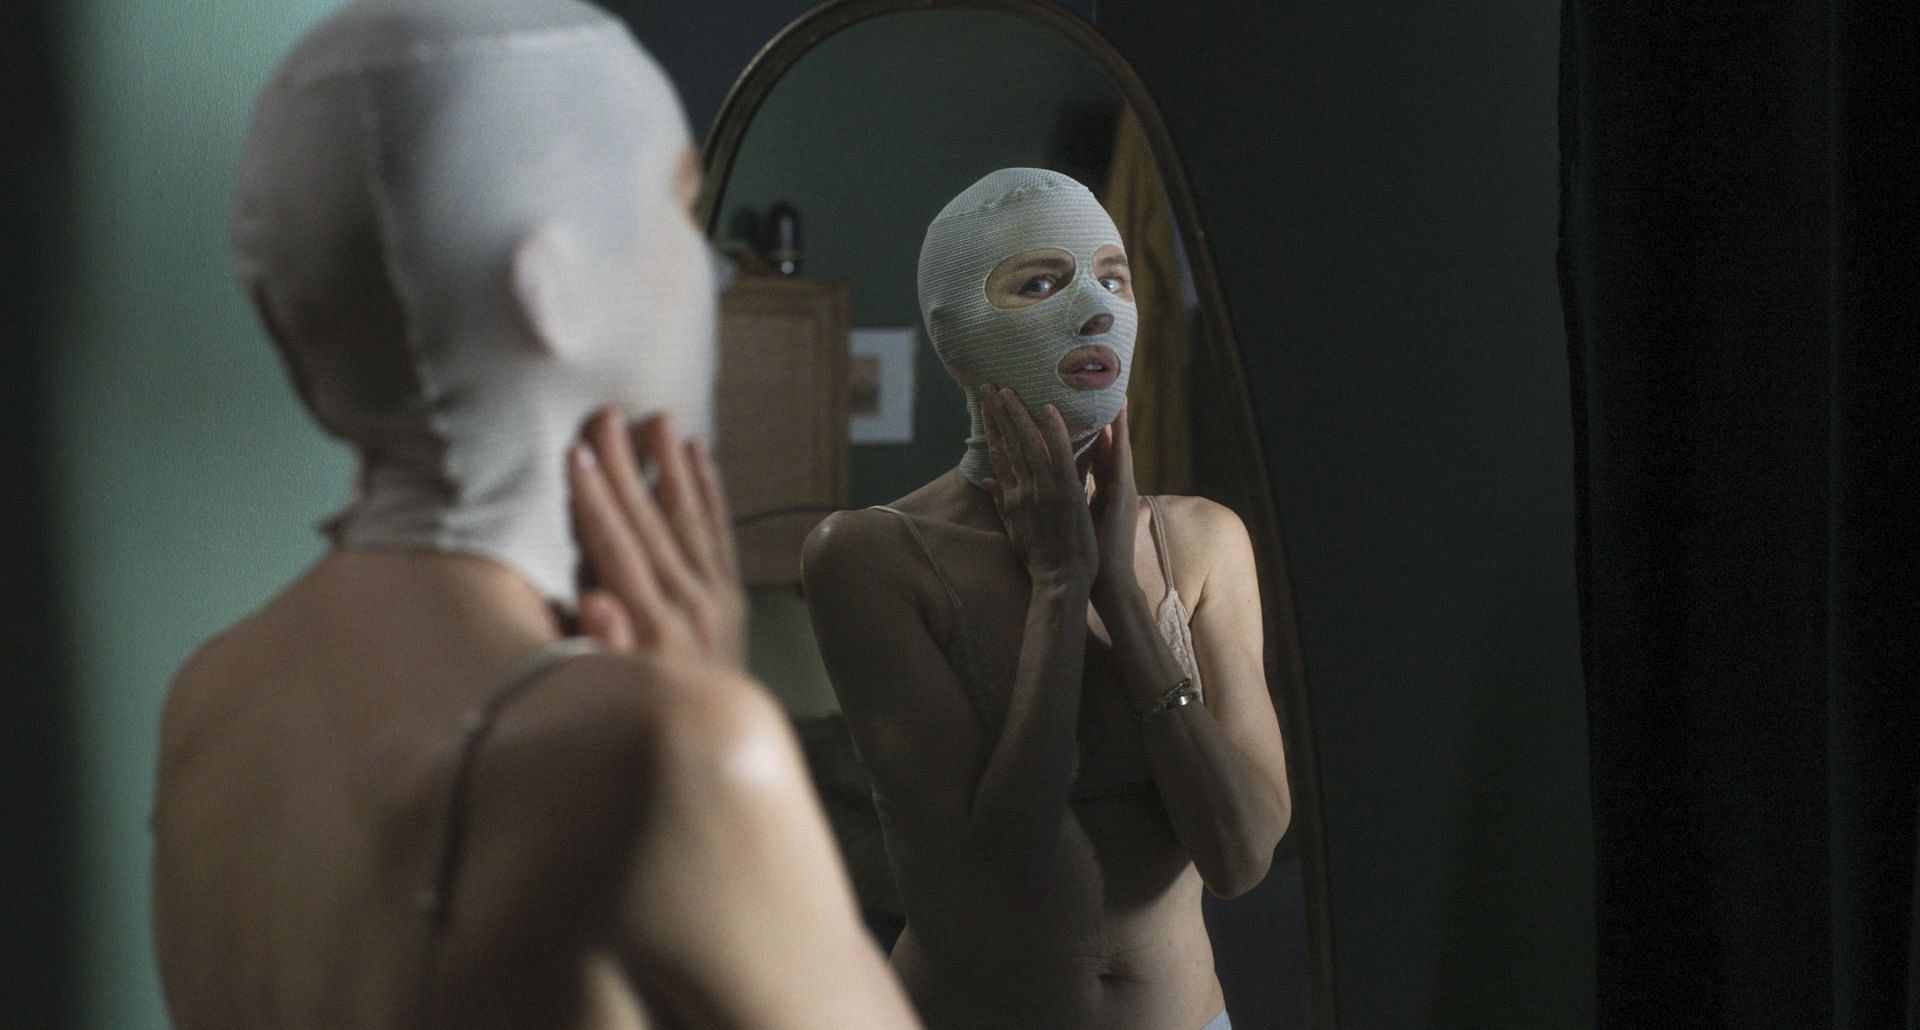 a still from Goodnight Mommy (image via Amazon Prime)